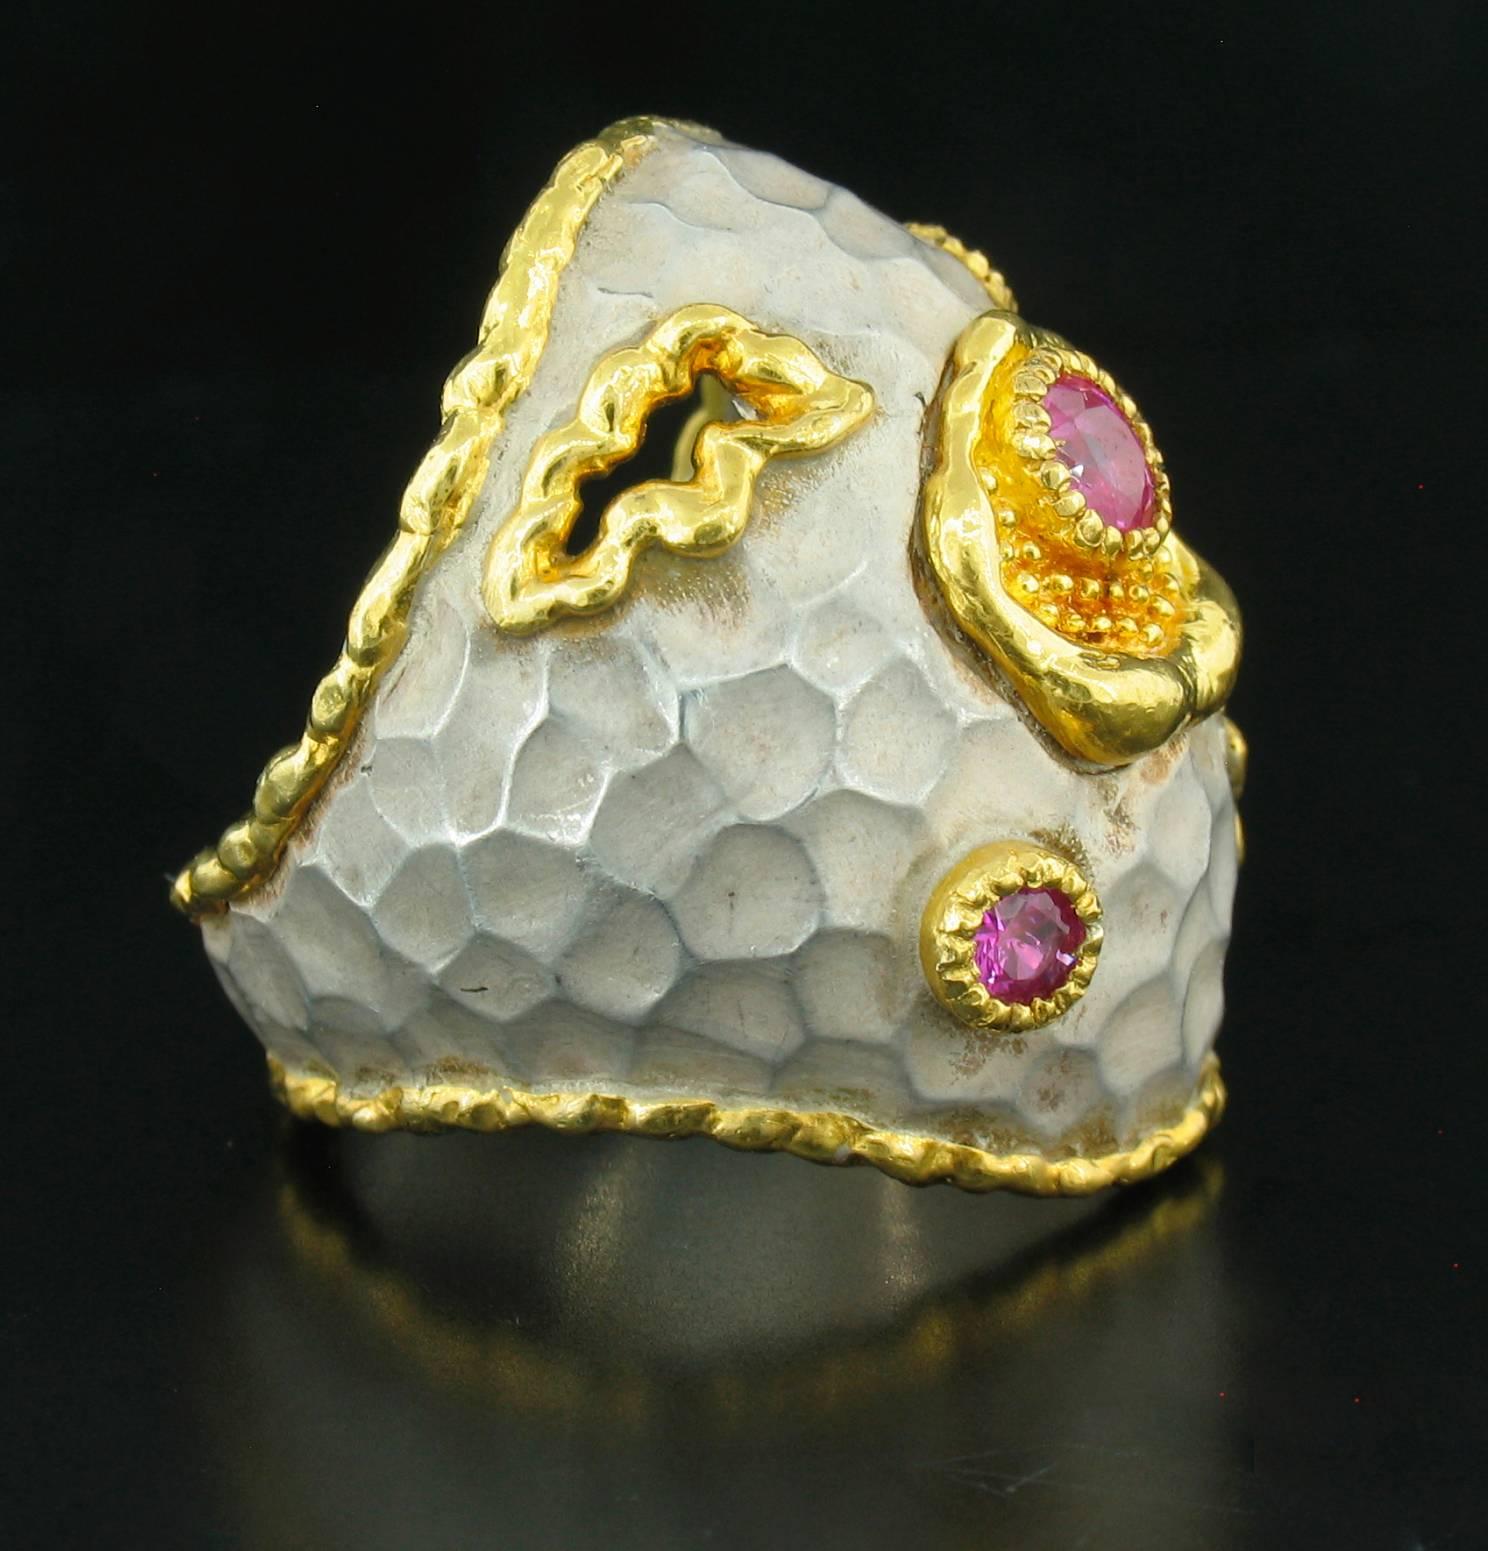 This ring was designed and made by well known designer Victor Velyan. It contains 3 round, faceted Pink Sapphires weighing a total of 0.60 carats.  It is made of a base of pure Silver with all accent work created in 24k yellow gold The 'white' is a